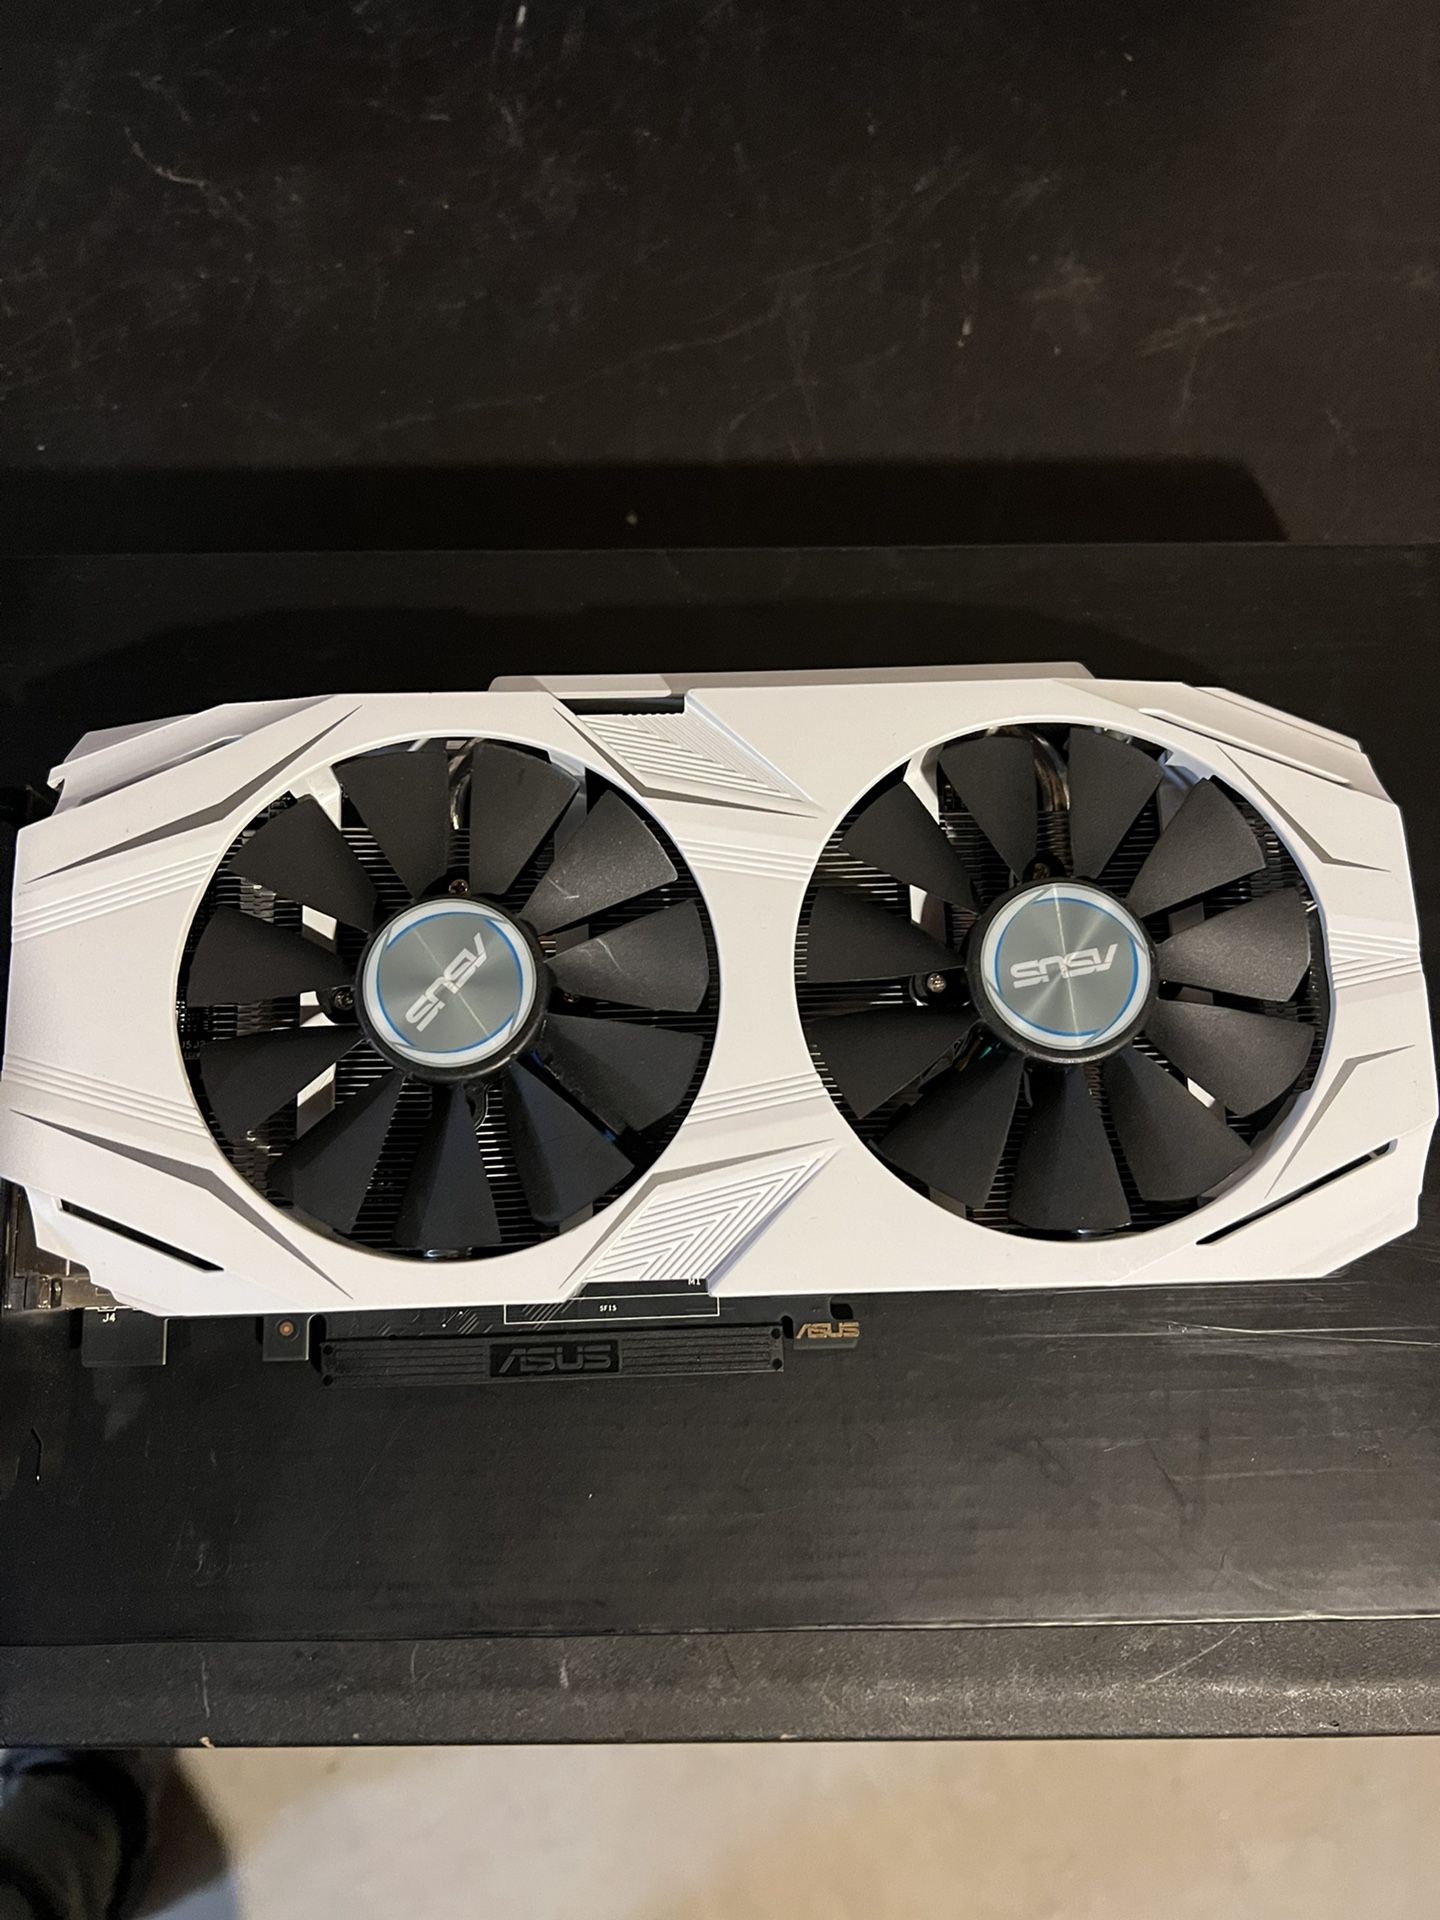 Asus GTX 1060 6gb for Sale in Naugatuck, CT - OfferUp